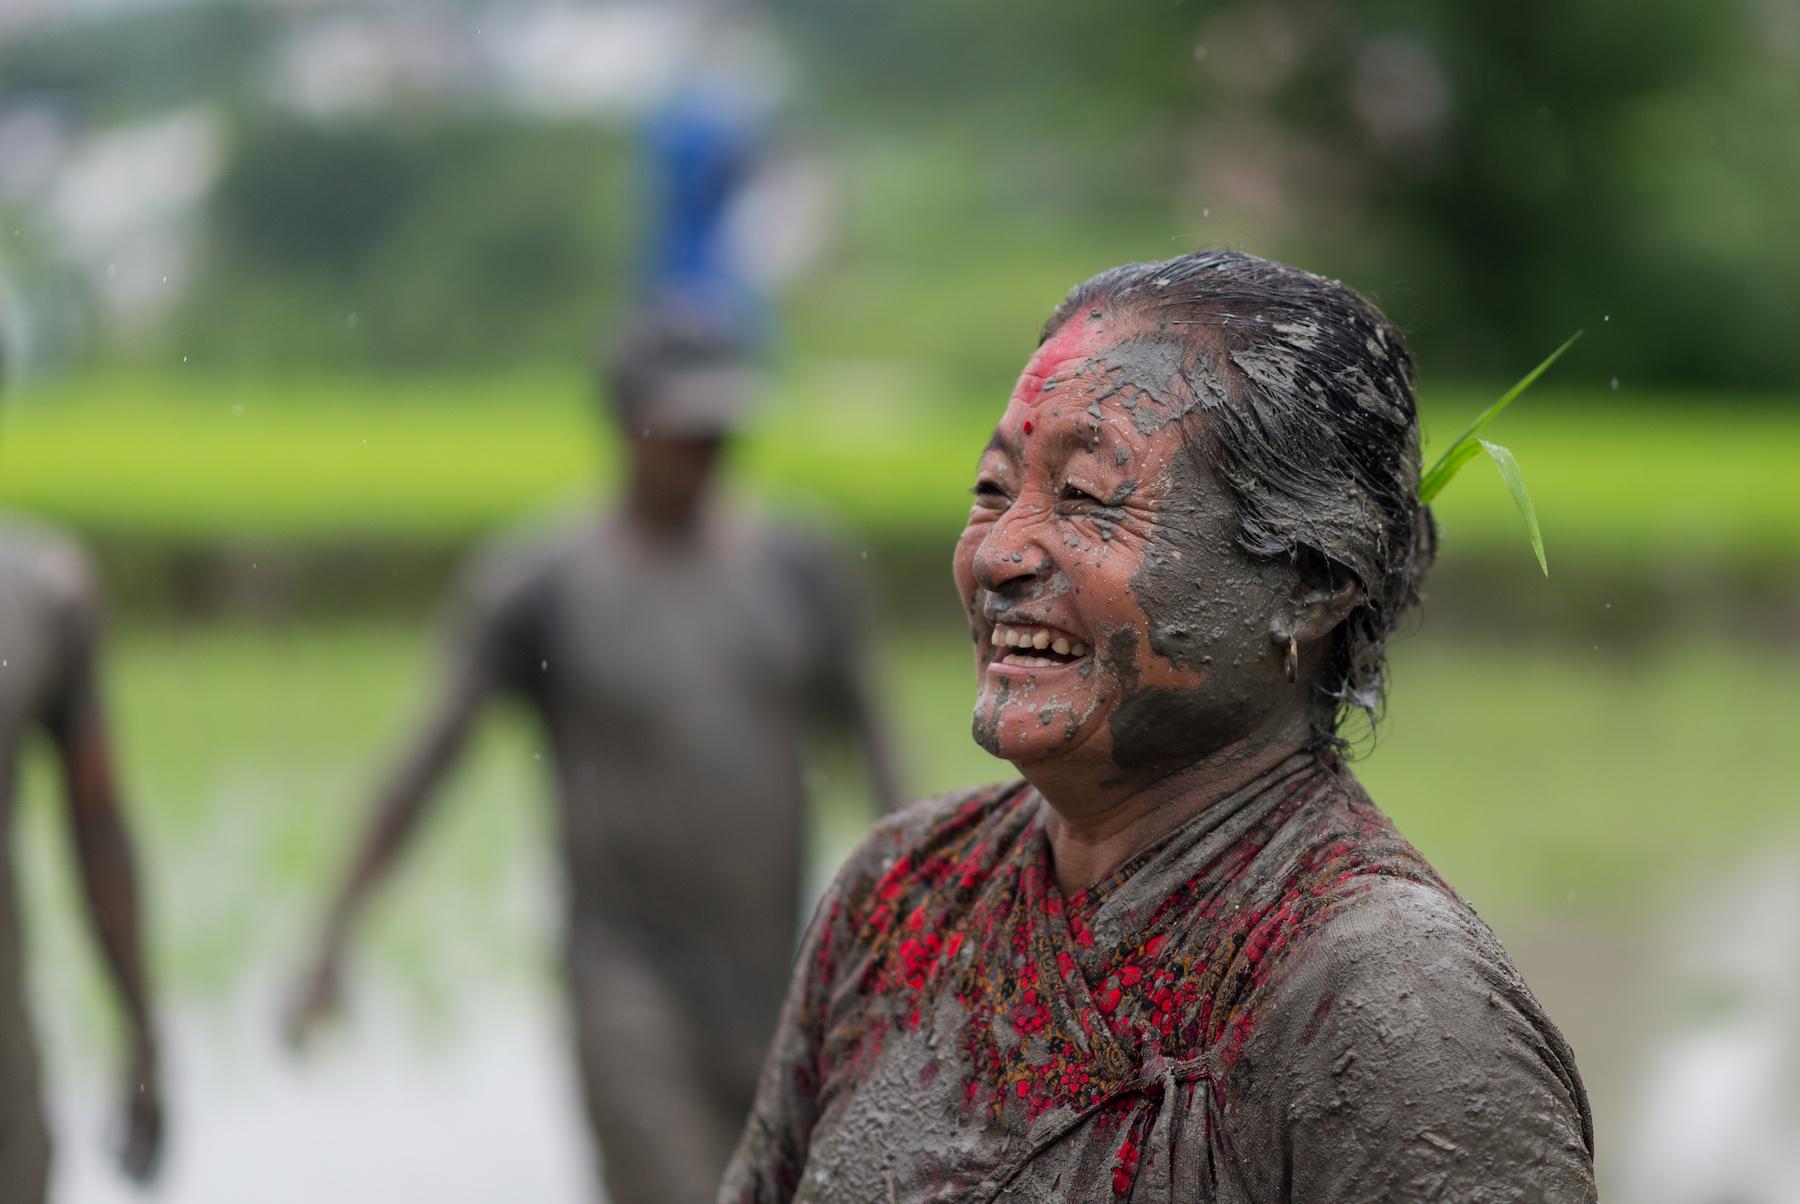 A woman, who appears to be older, smiles while her face and clothes are covered in mud.